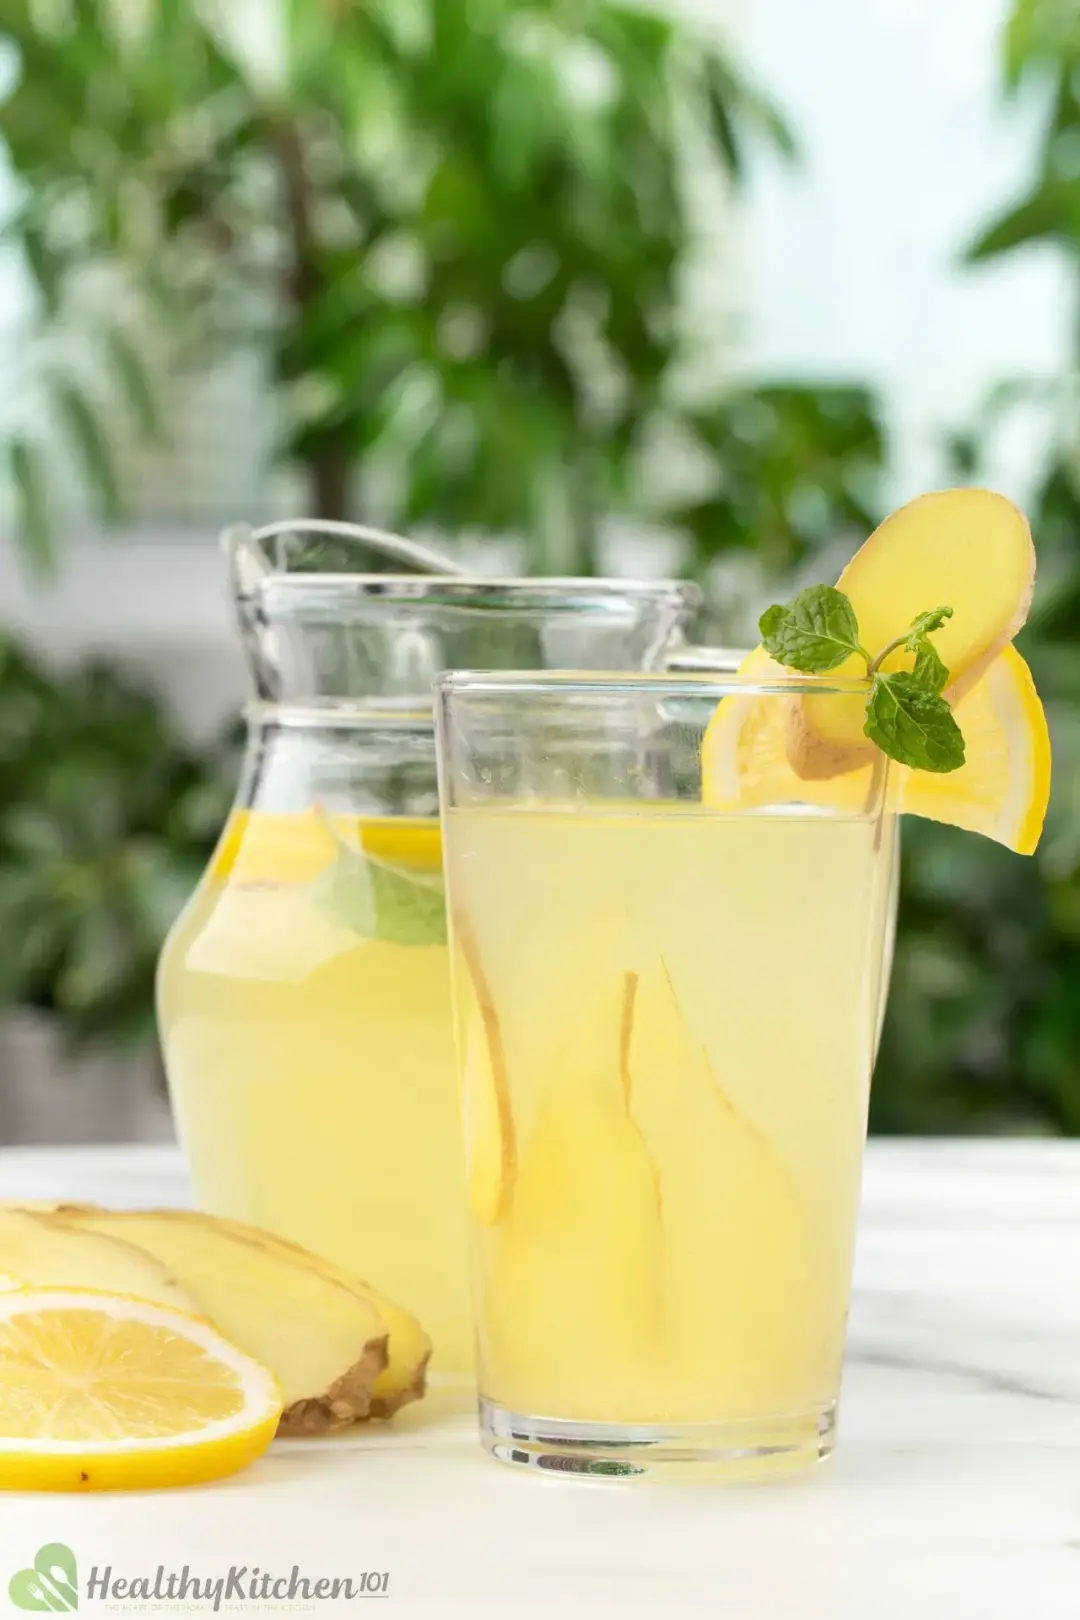 Benefits of Ginger Juice with Lemon